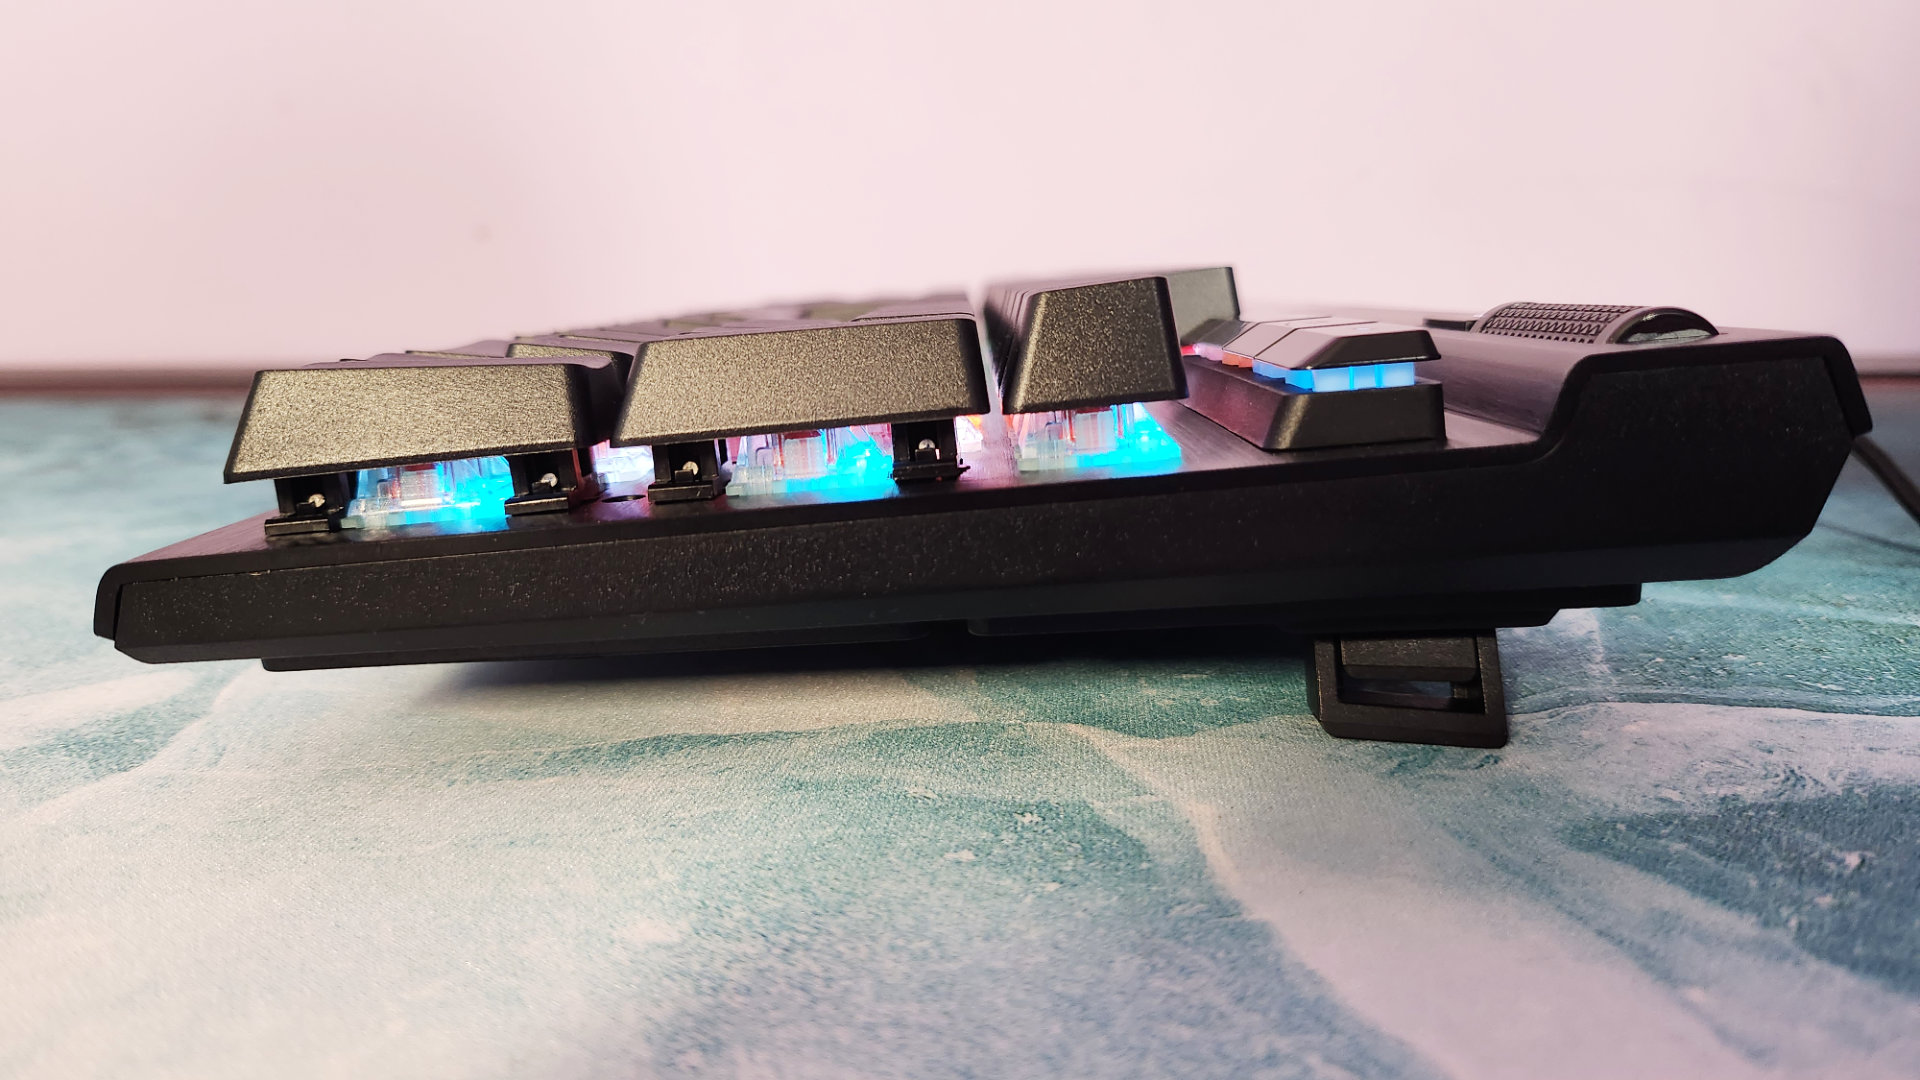 Corsair K70 RGB Pro review: A side view of a gaming keyboard, showcasing its retractable feet and RGB lighting